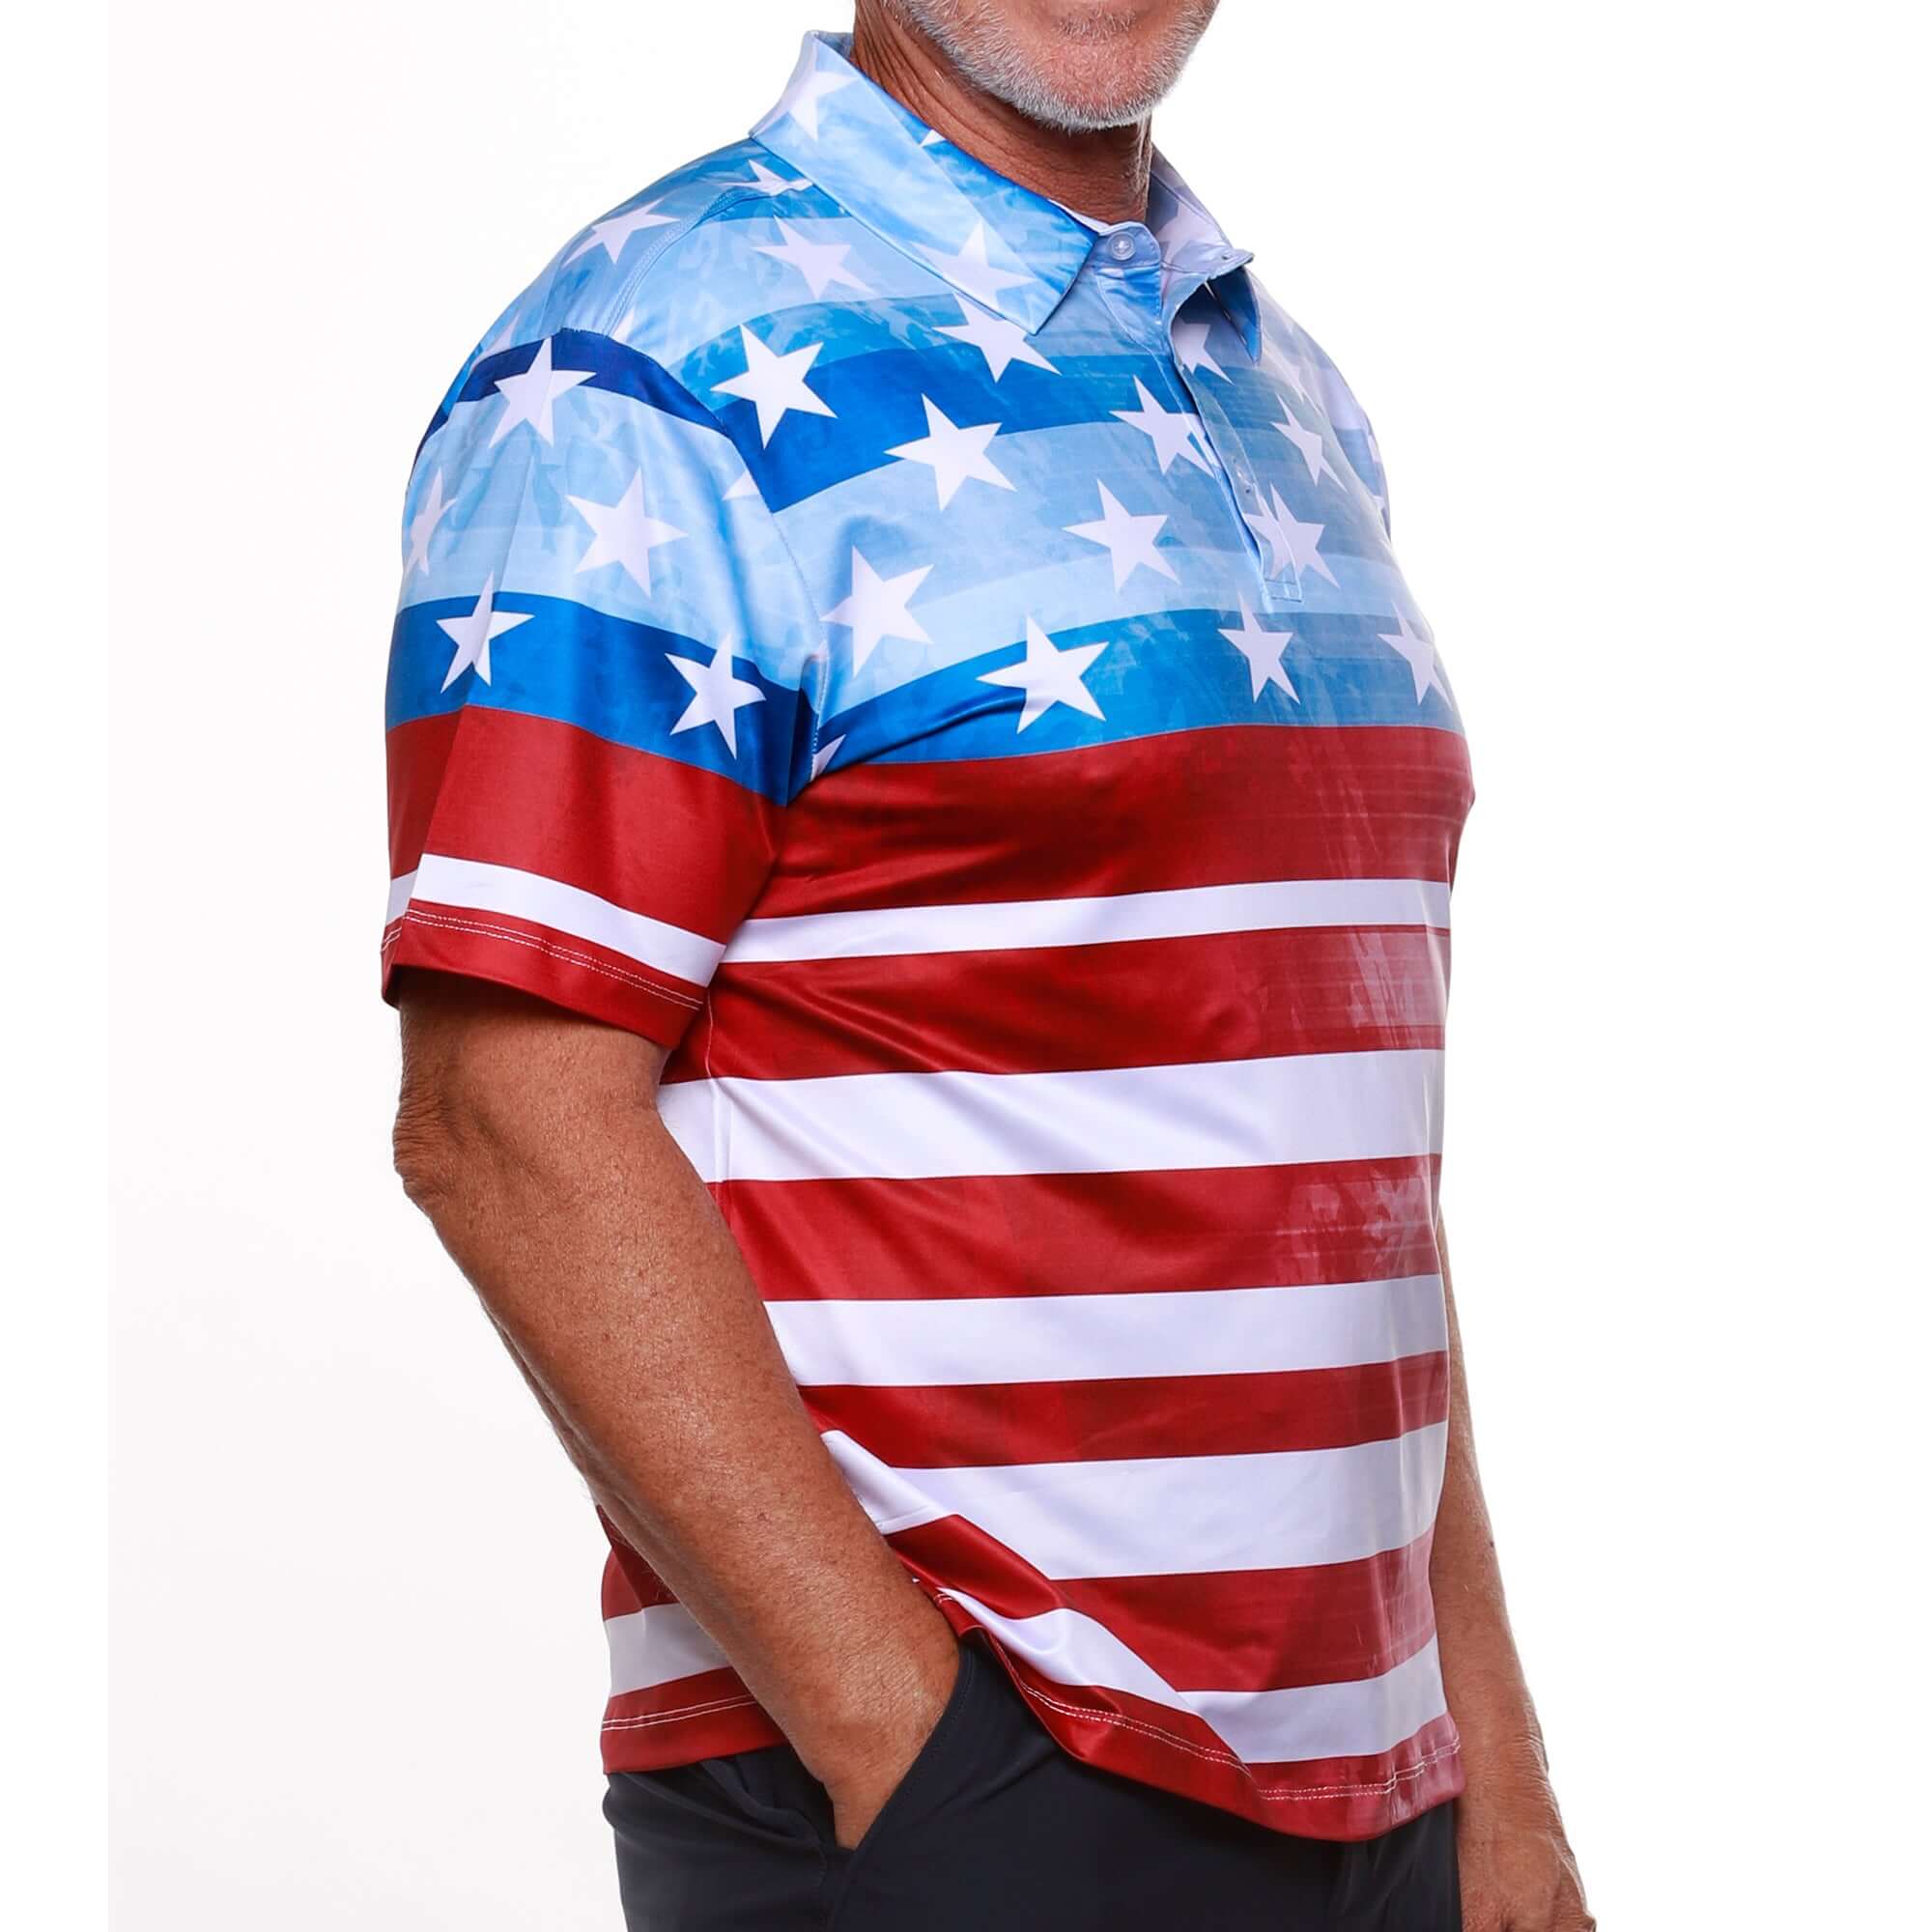 Men's Stars and Stripes Performance Golf Polo